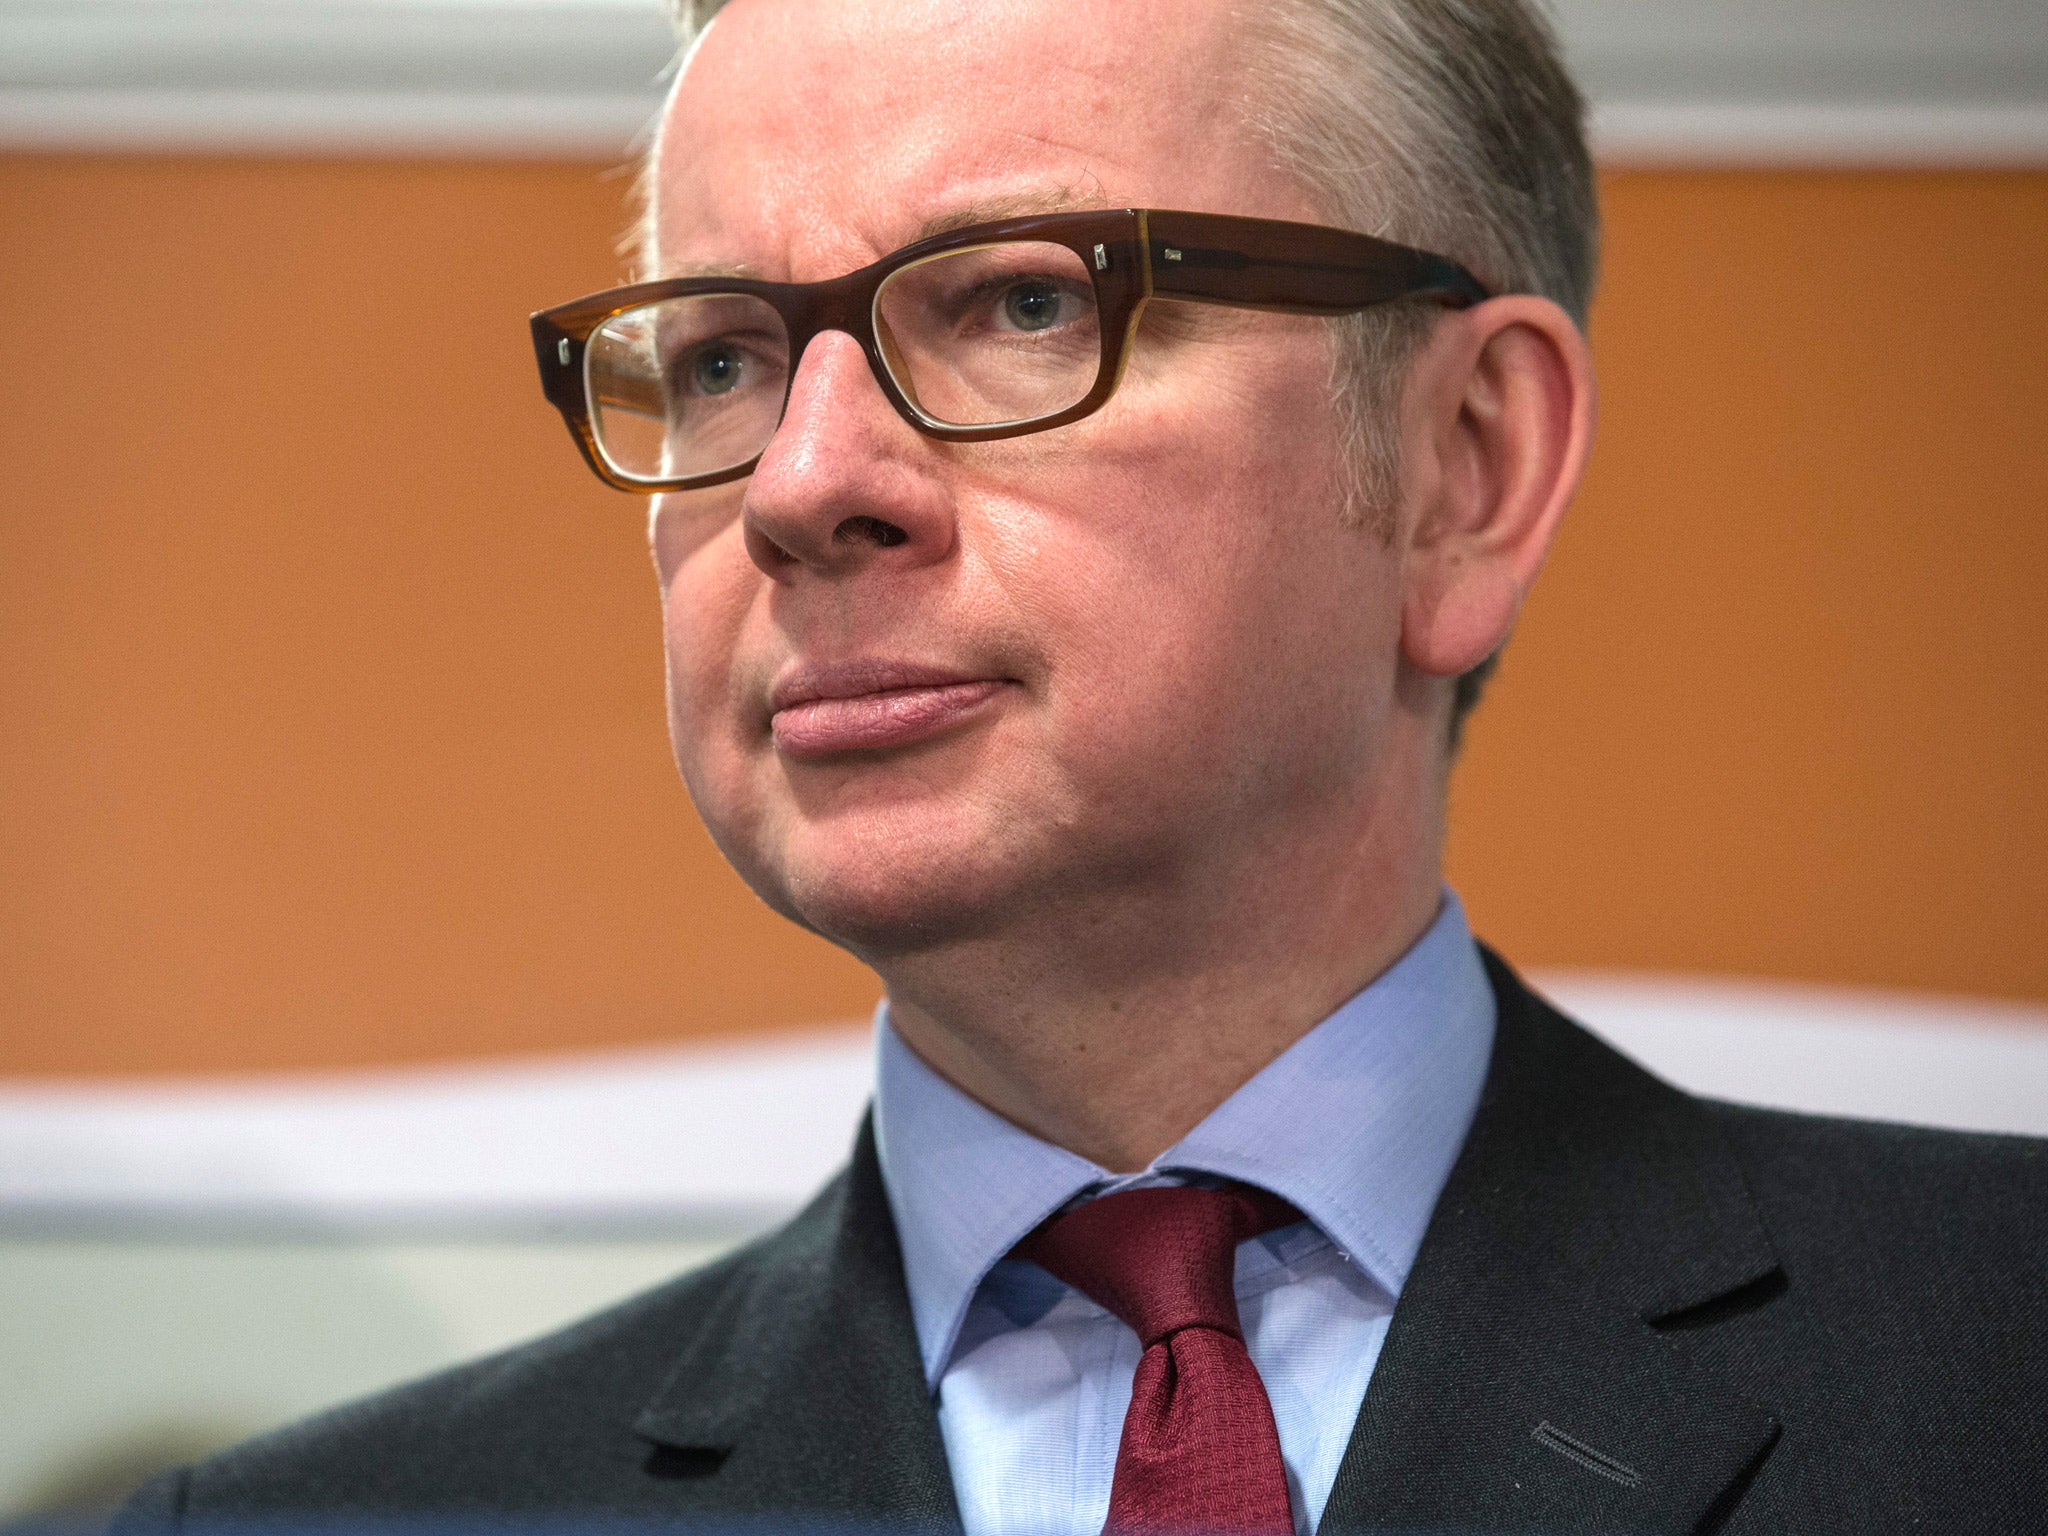 Michael Gove, the Secretary of State for Education